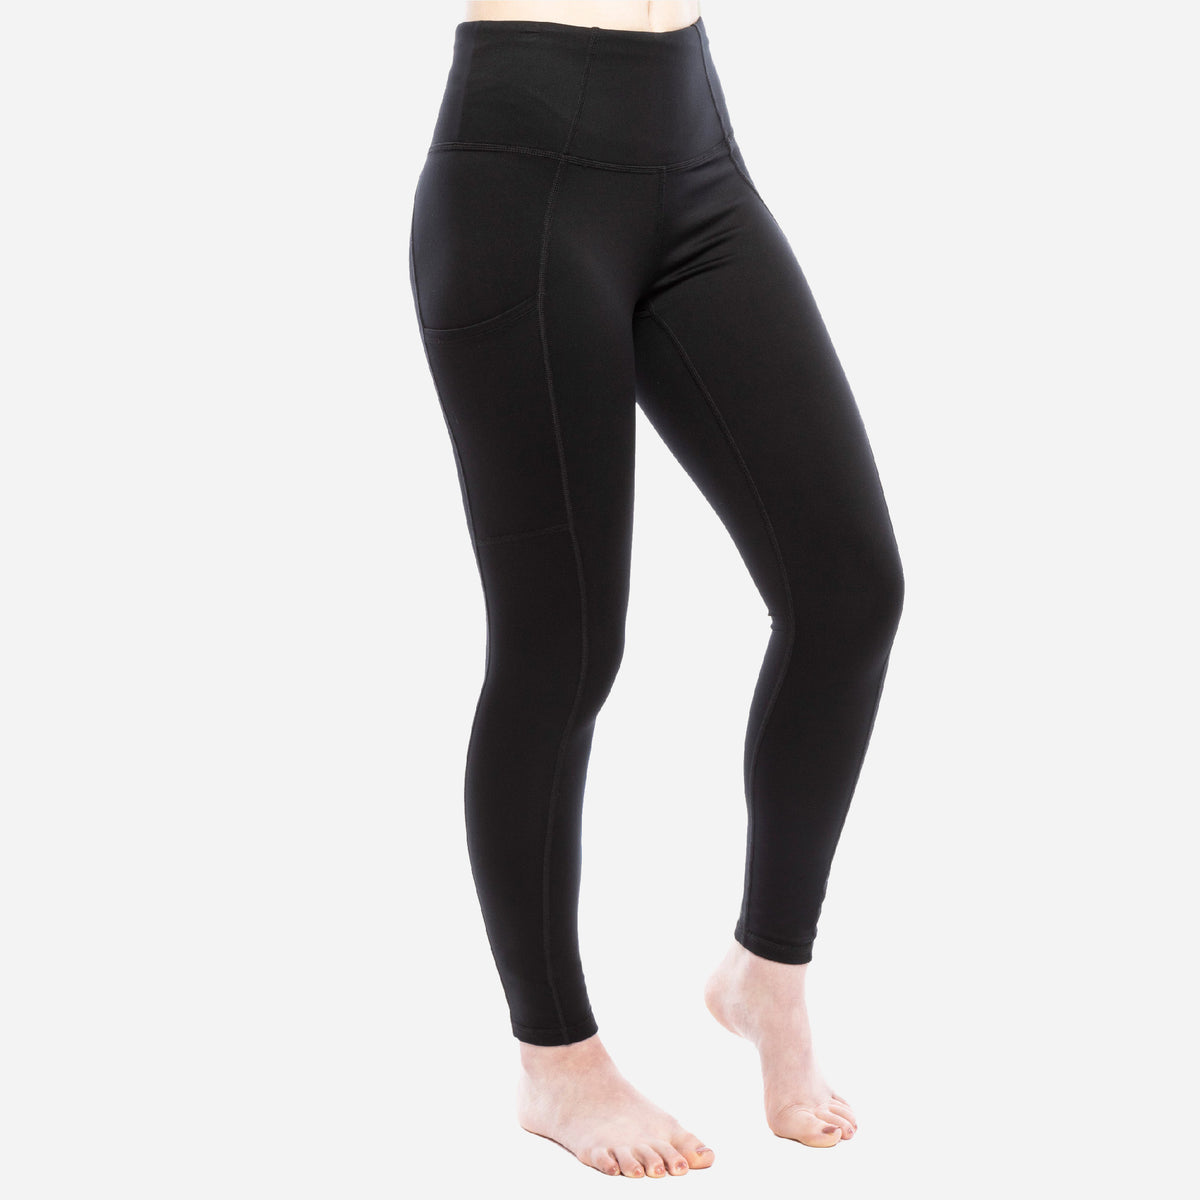 Copper Fit Women's Energy Everyday Workout Leggings, Black, Medium at   Women's Clothing store